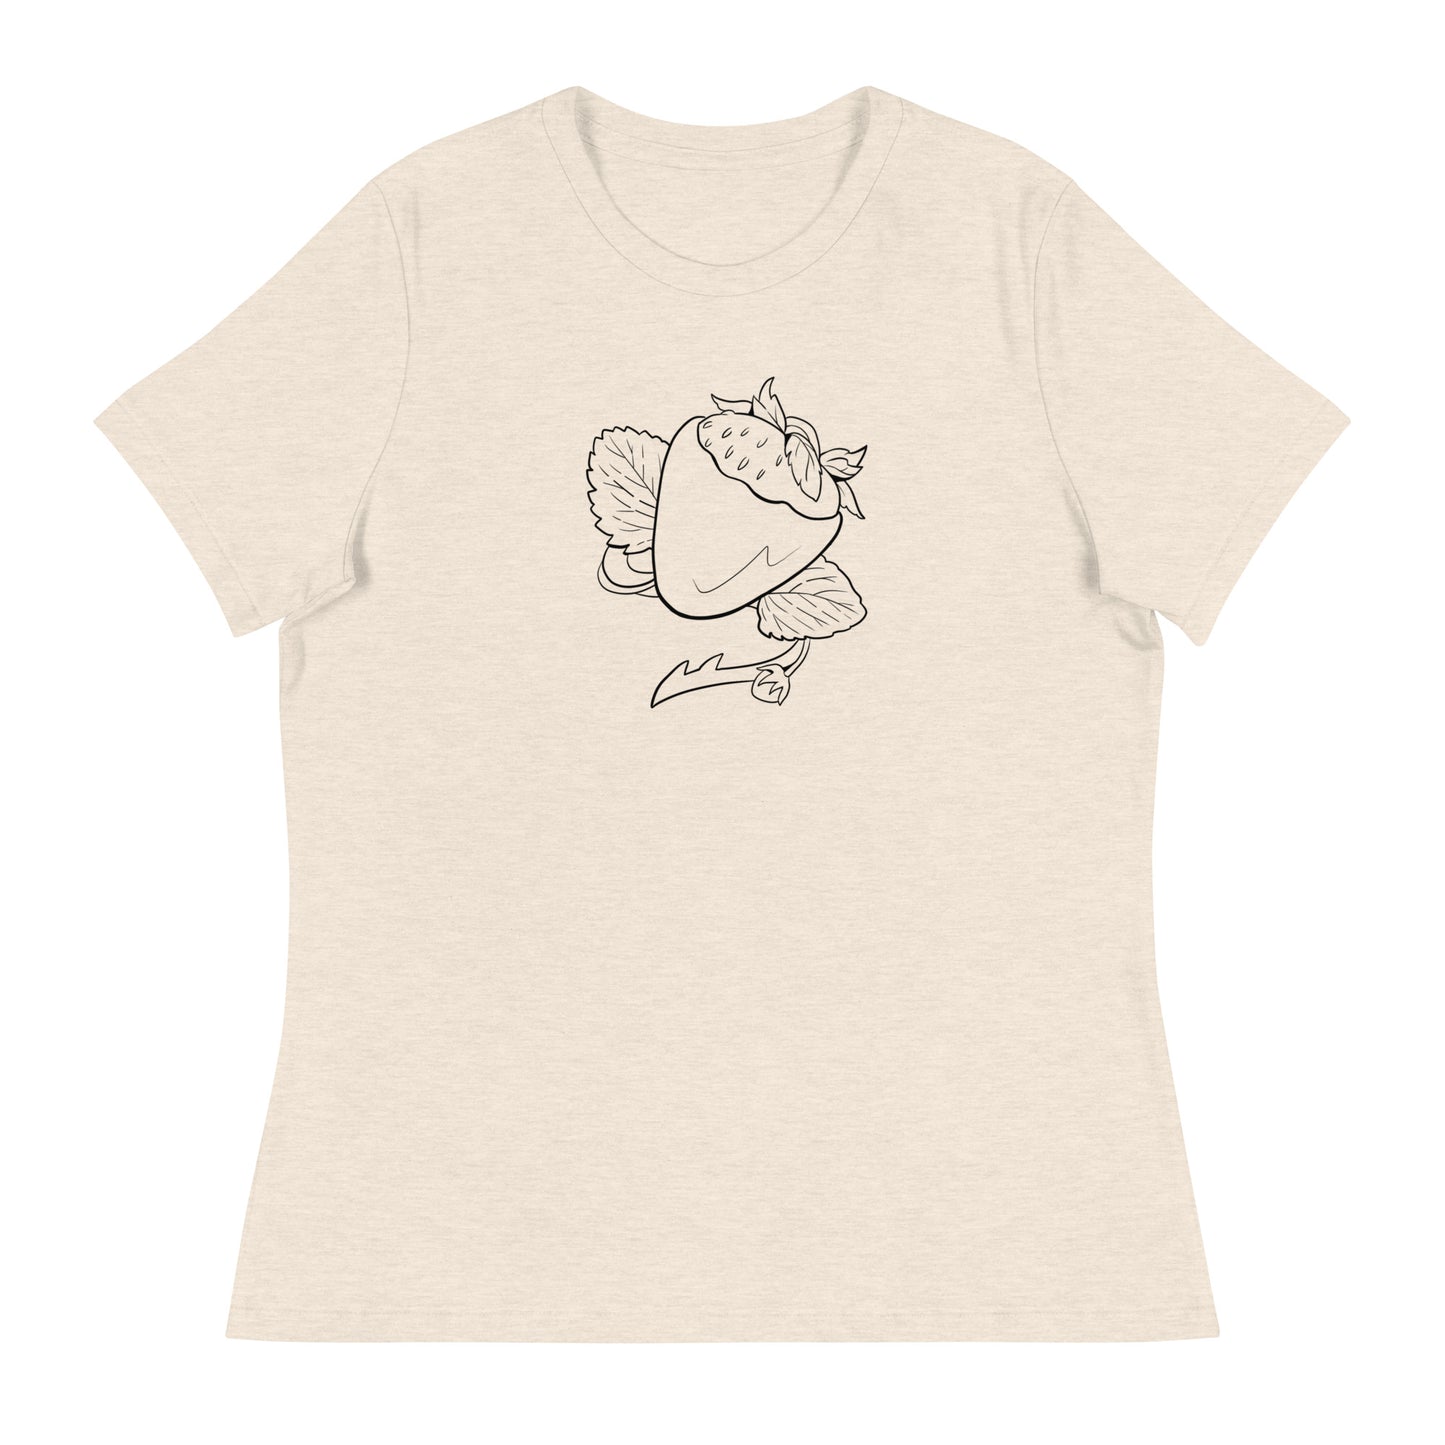 "Demon Strawberry" Women's Relaxed T-Shirt (The Guild Codex)